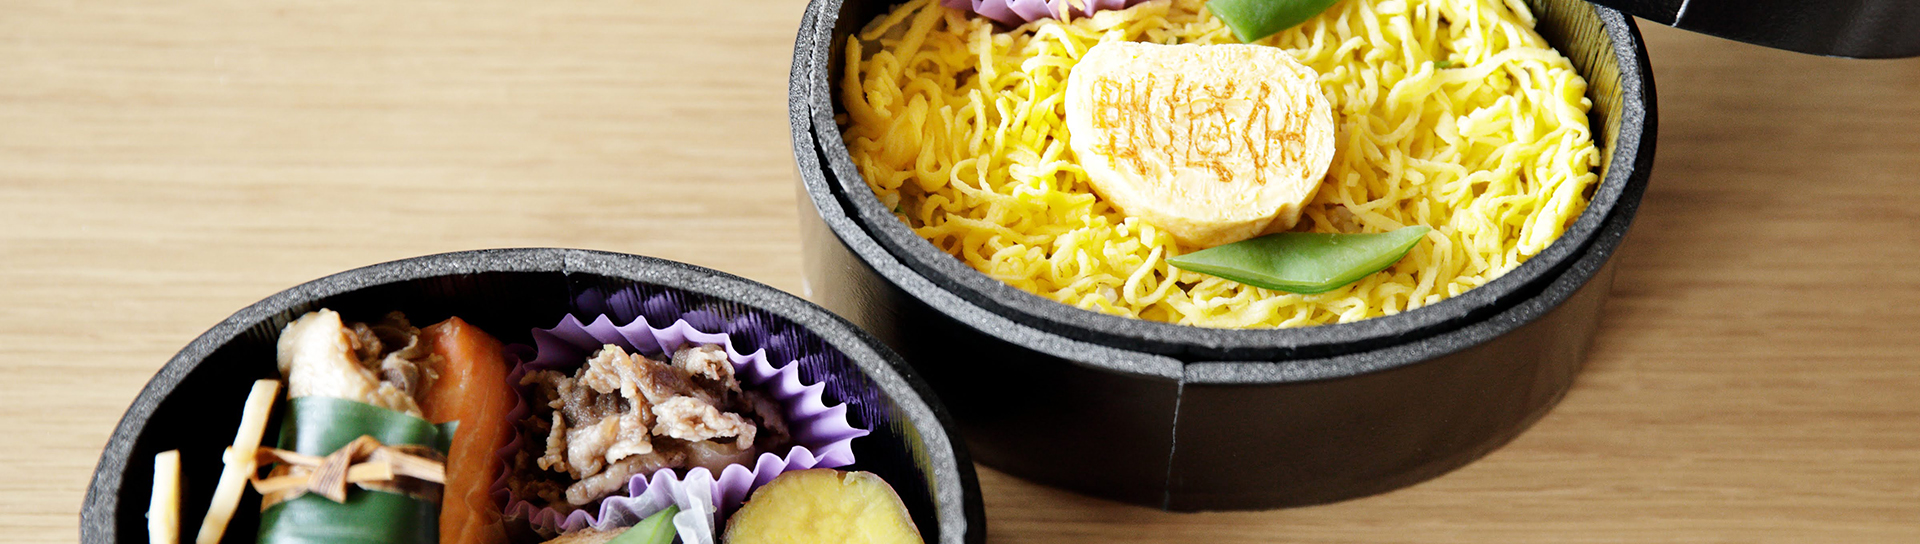 a bowl of noodles next to a bowl of various foods